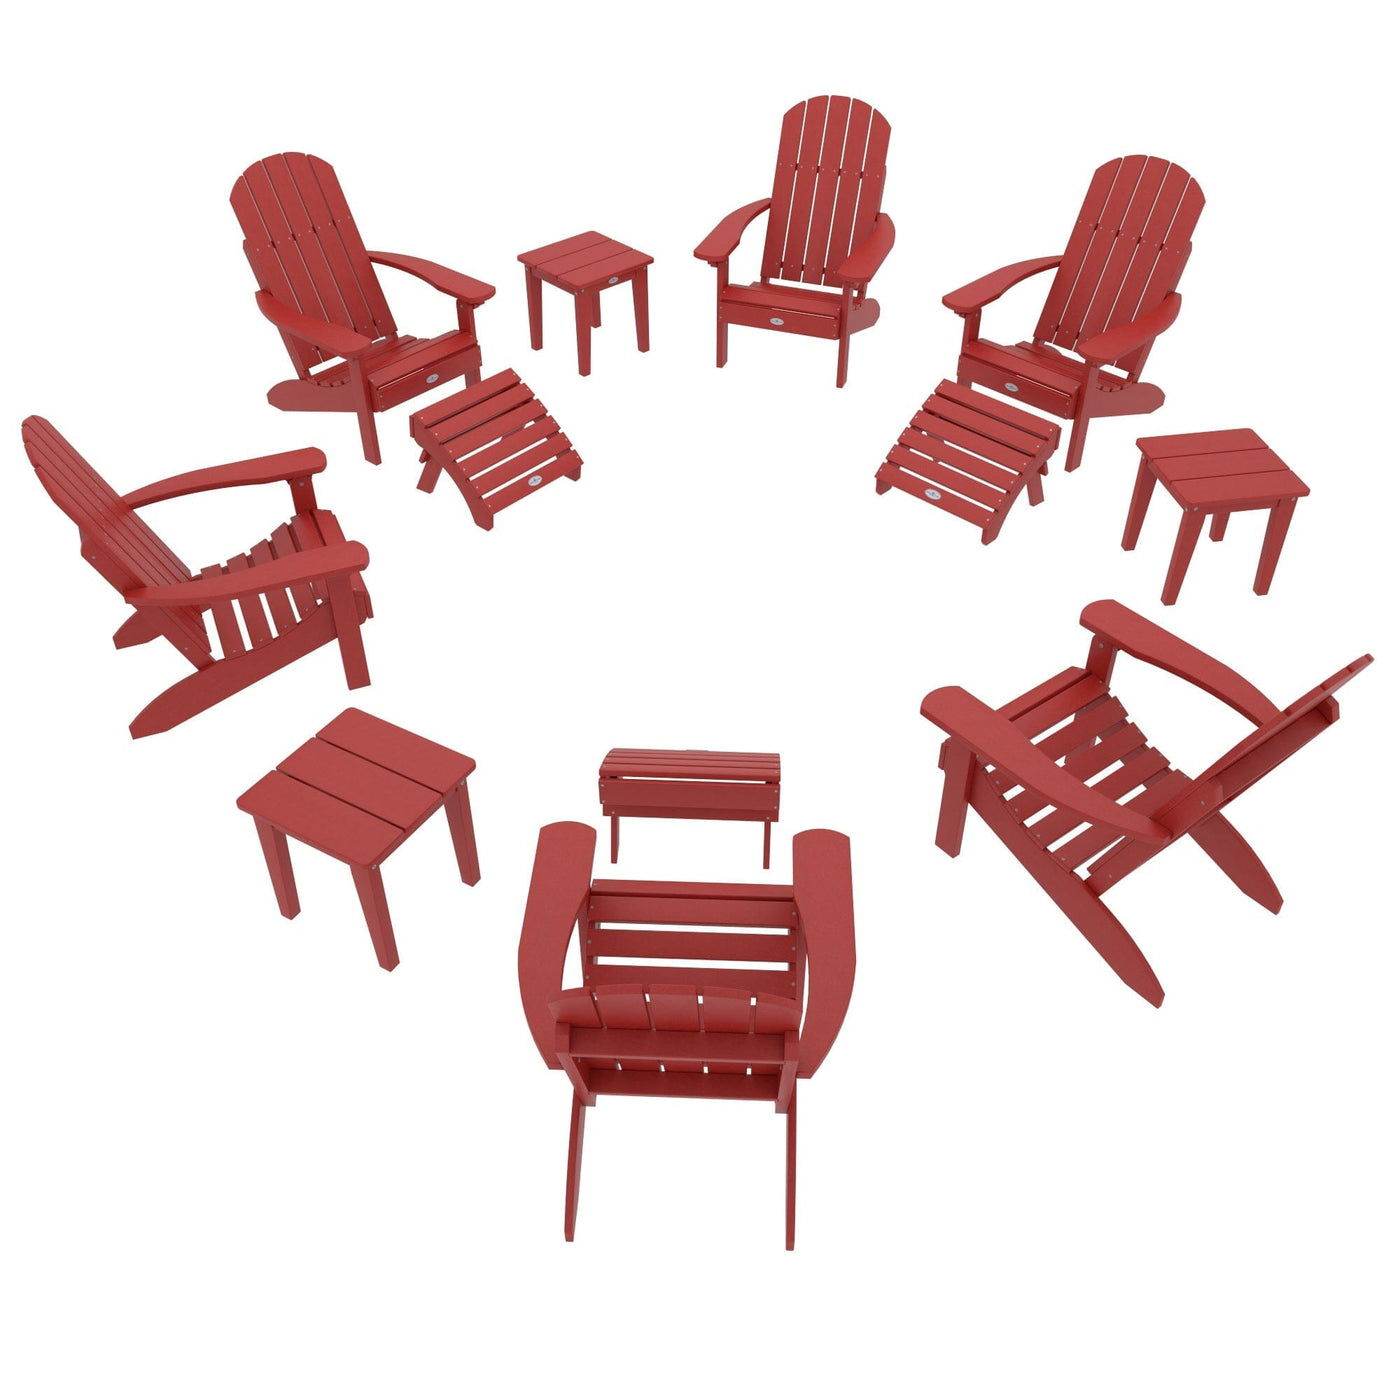 Cape Classic Adirondack, Side Table and Ottoman 12 pc Set Kitted Set Bahia Verde Outdoors Boathouse Red 